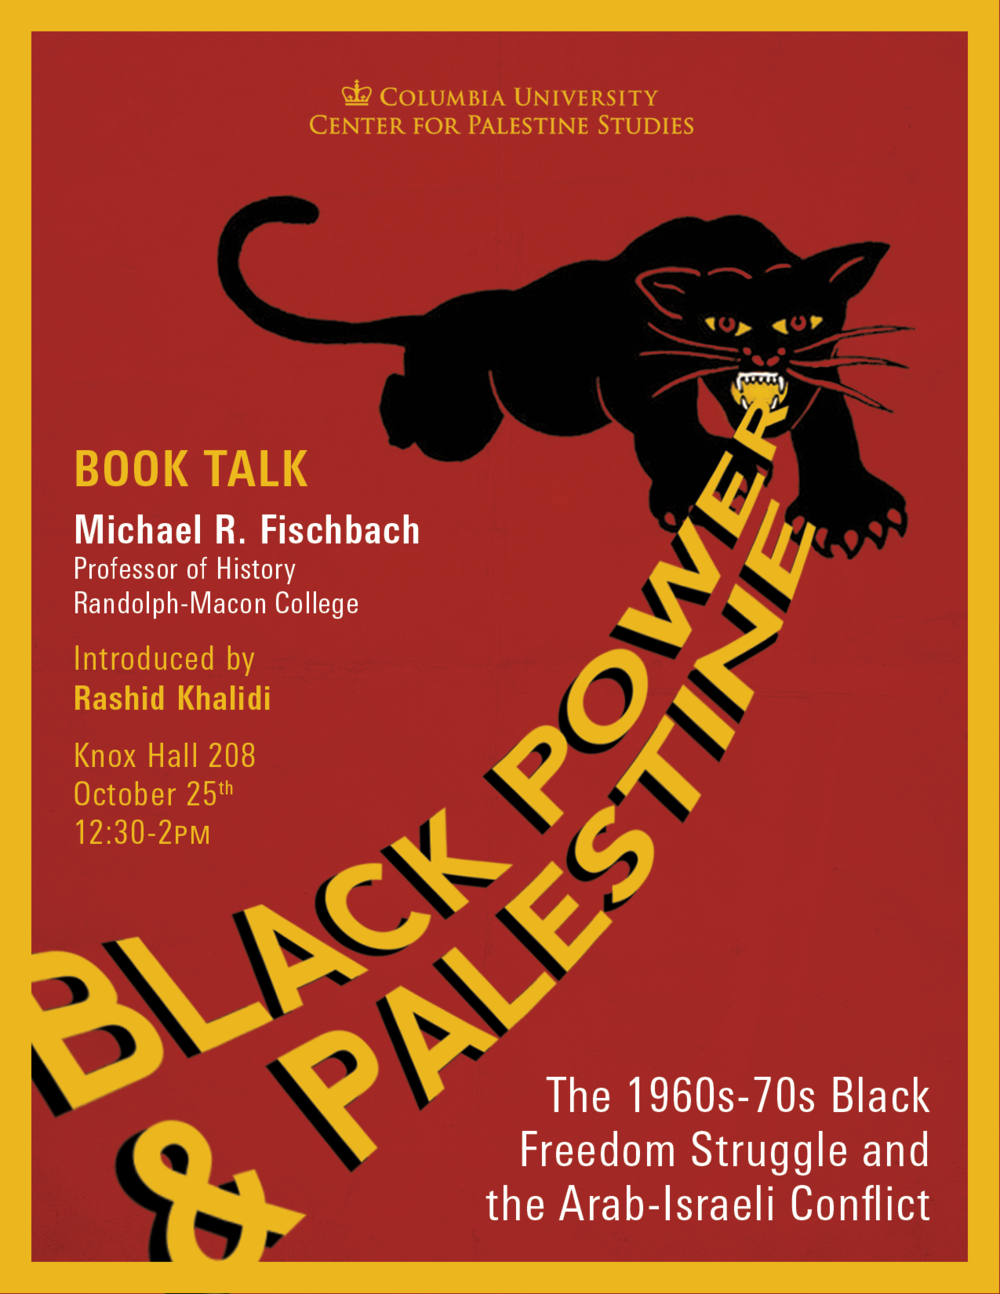 Black Power and Palestine: The 1960s-70s Black Freedom Struggle and the Arab-Israeli Conflict